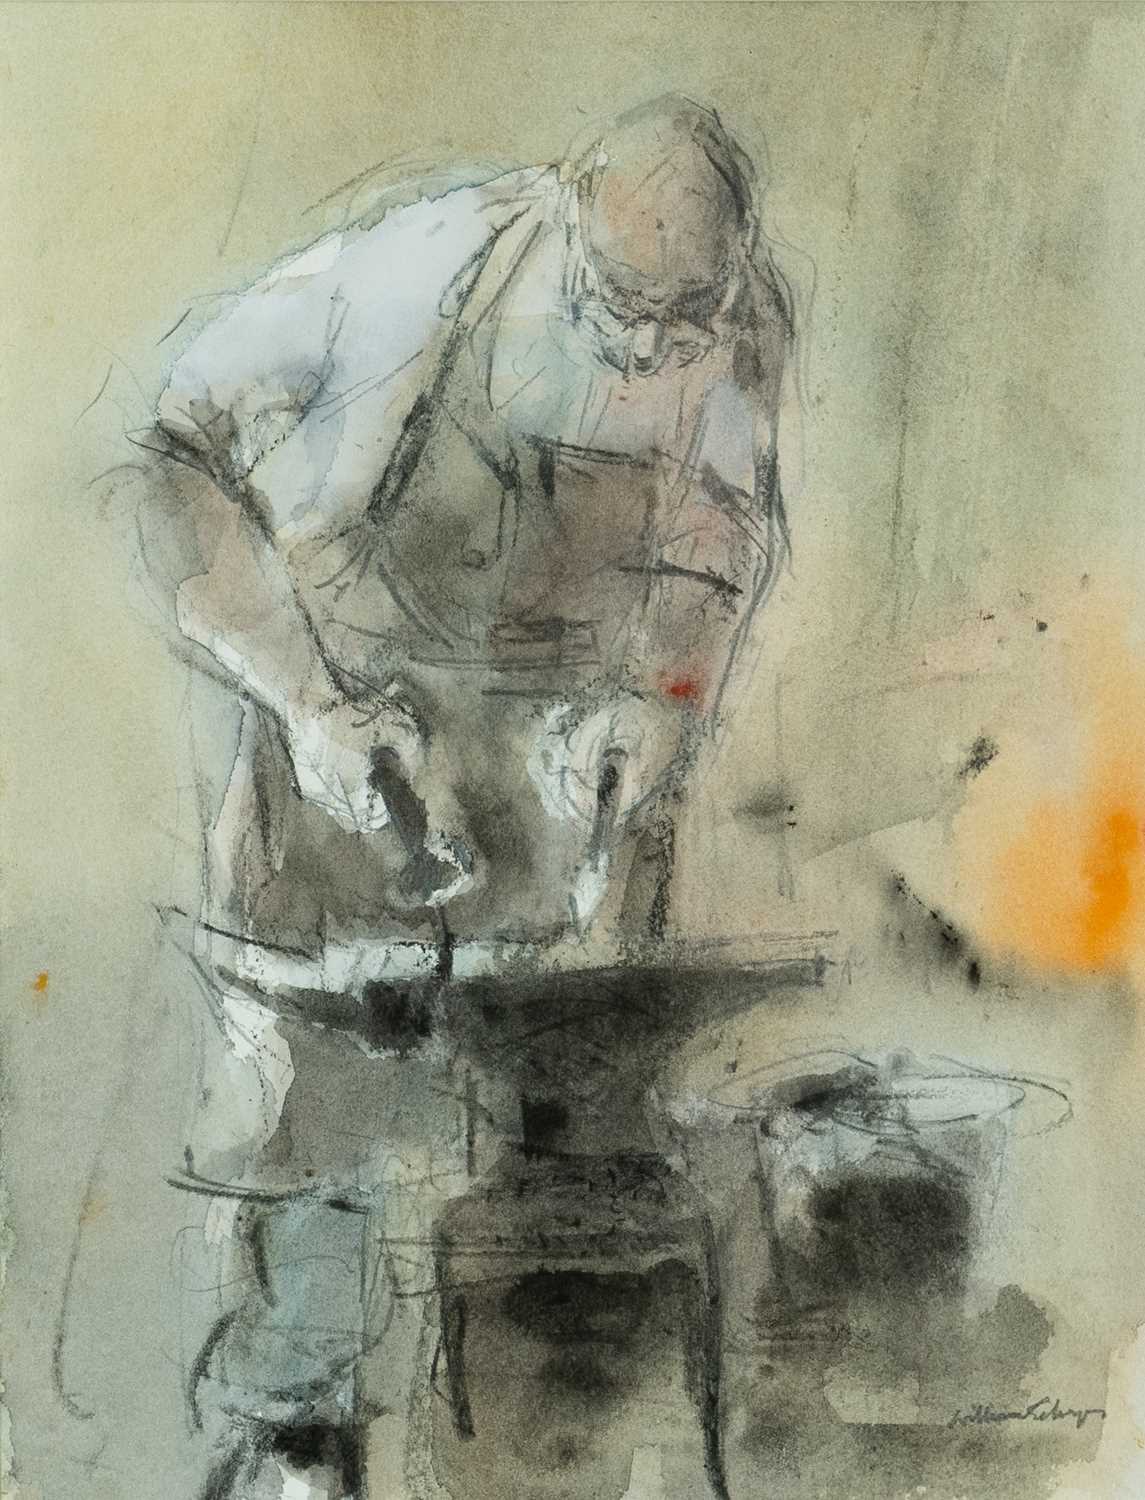 ‡ WILLIAM SELWYN (Welsh b. 1933) mixed media on paper - blacksmith in his workshop with burning